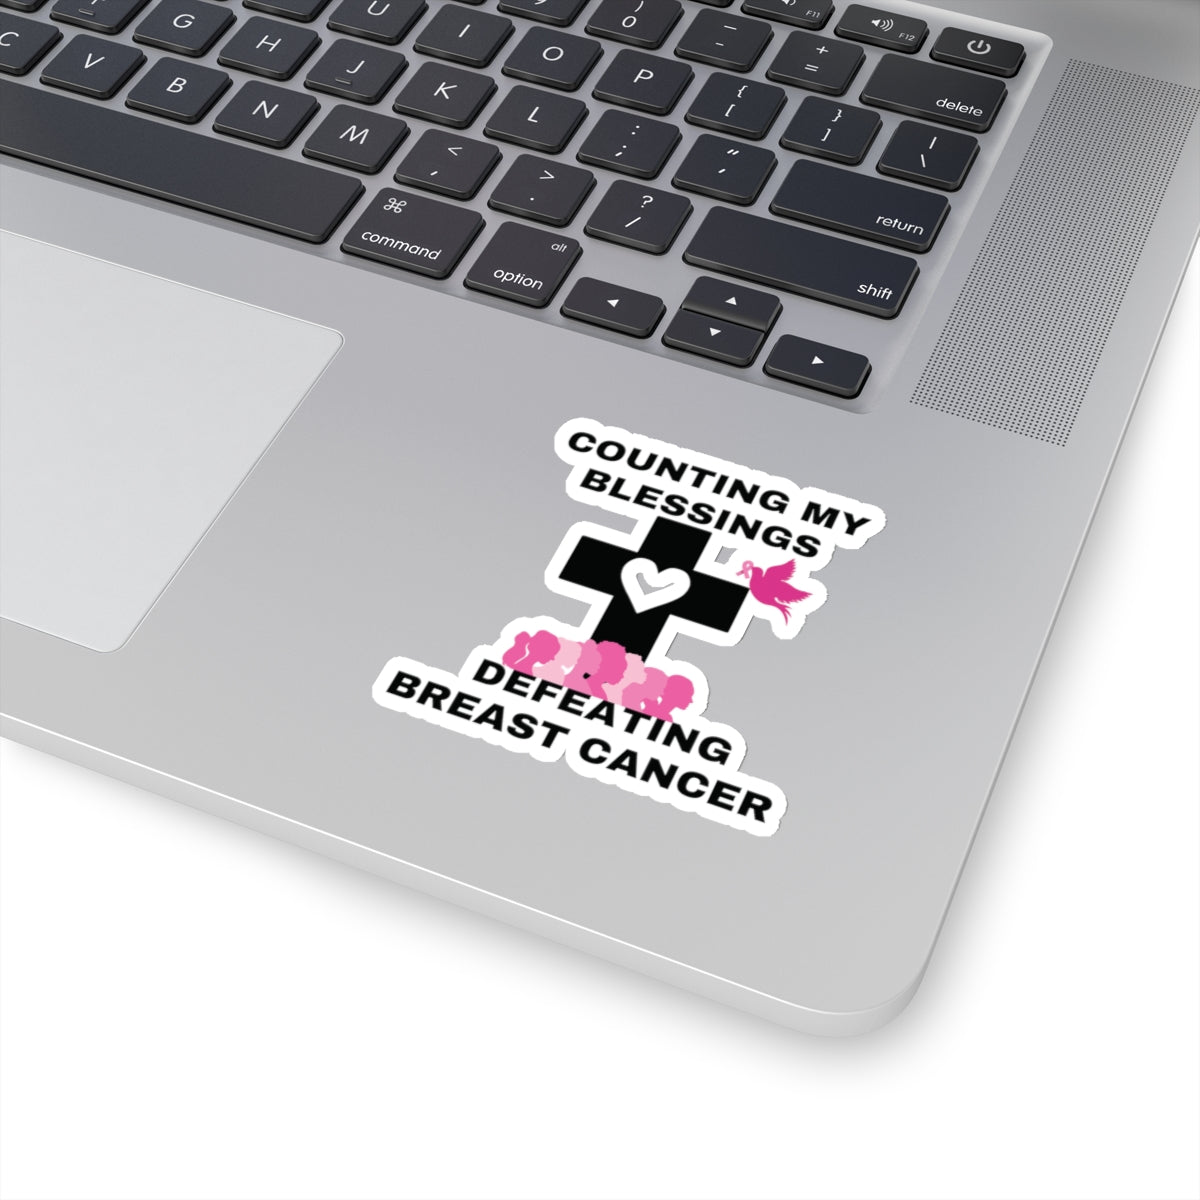 Counting My blessings Defeating Breast Cancer Motivational Quote Kiss-Cut Stickers-Paper products-mysticalcherry